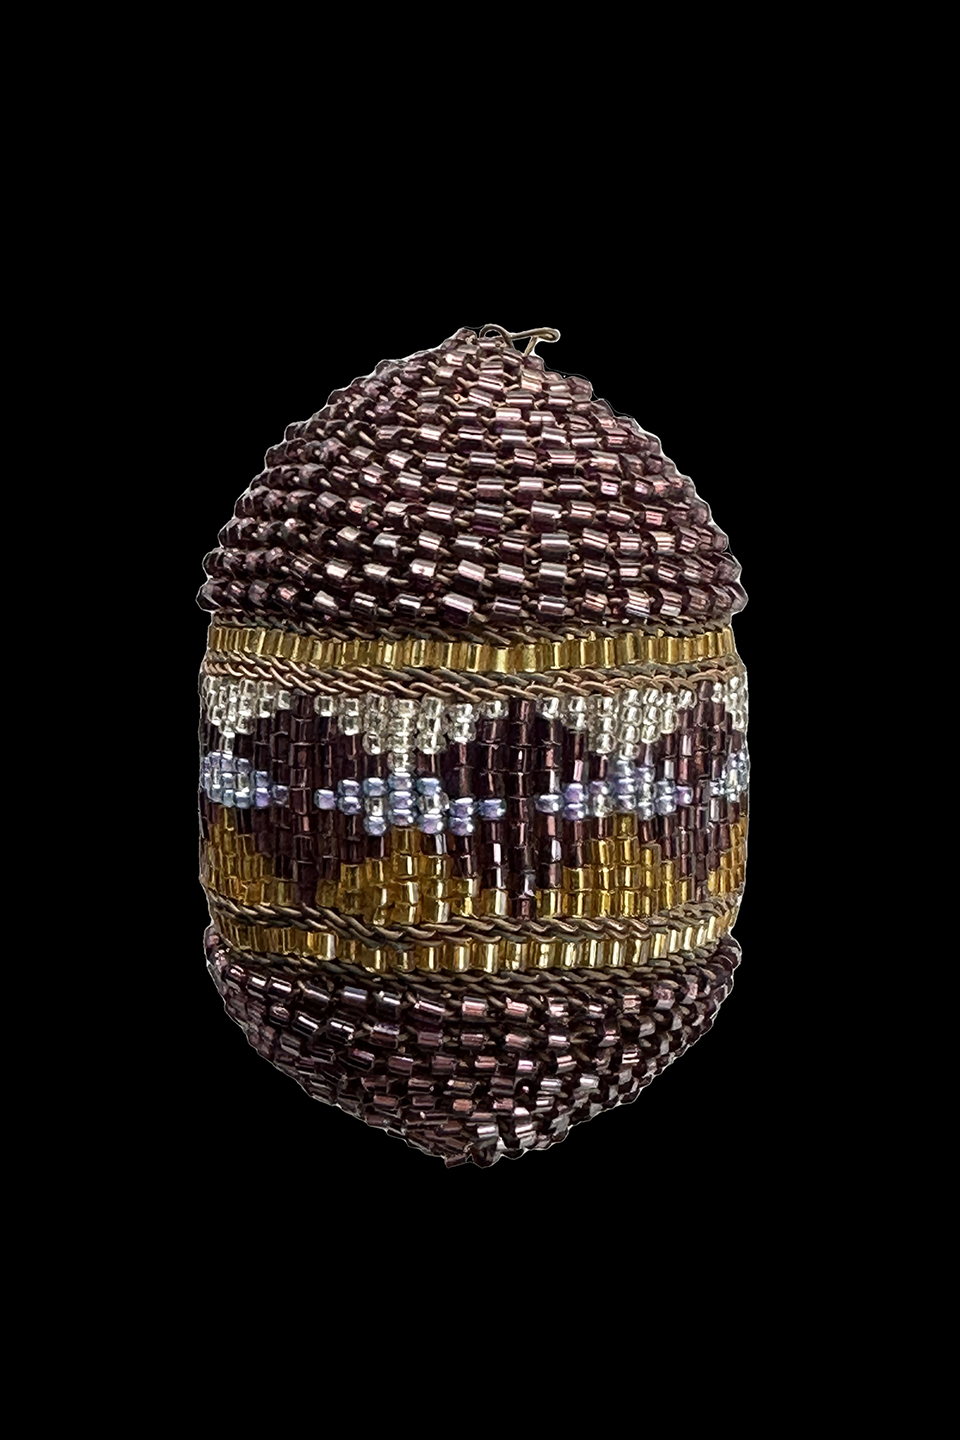 Fully Beaded Egg Shaped Ornament - South Africa